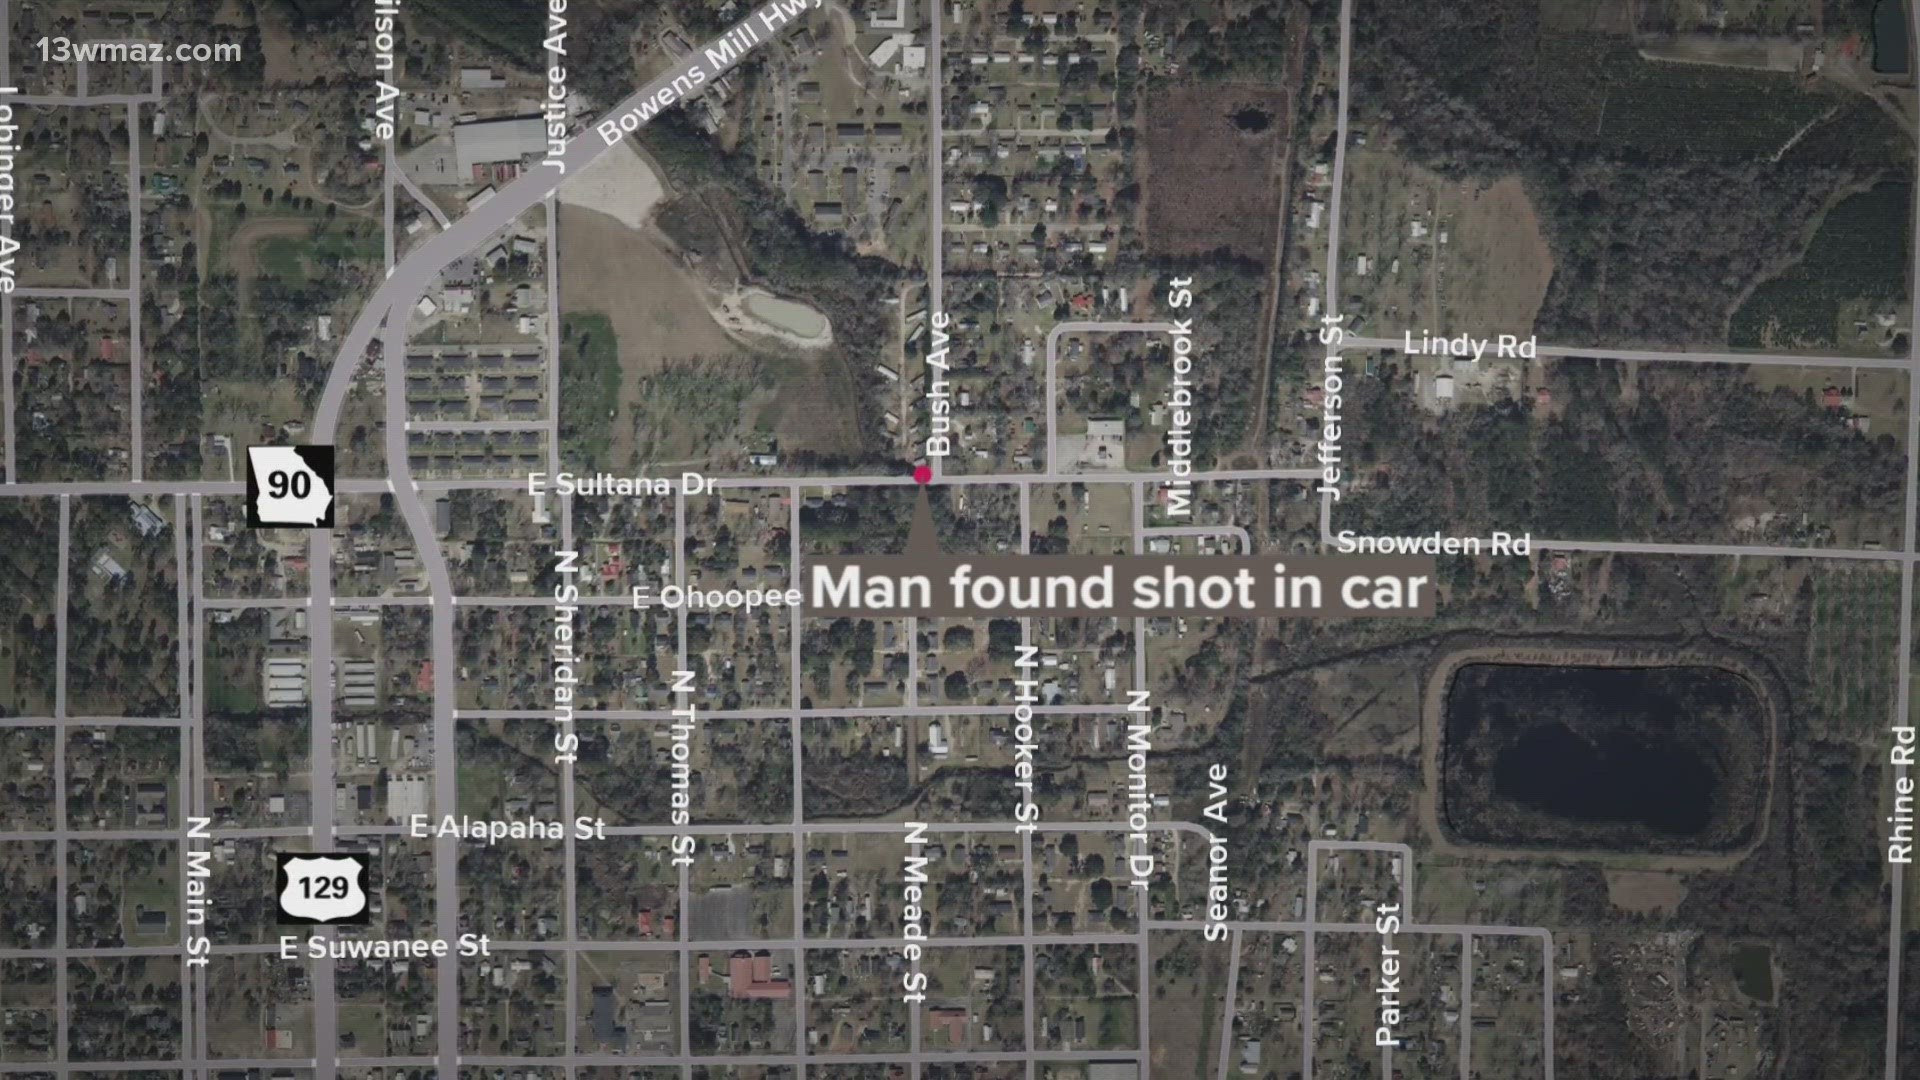 He was found inside his car at a stop sign.